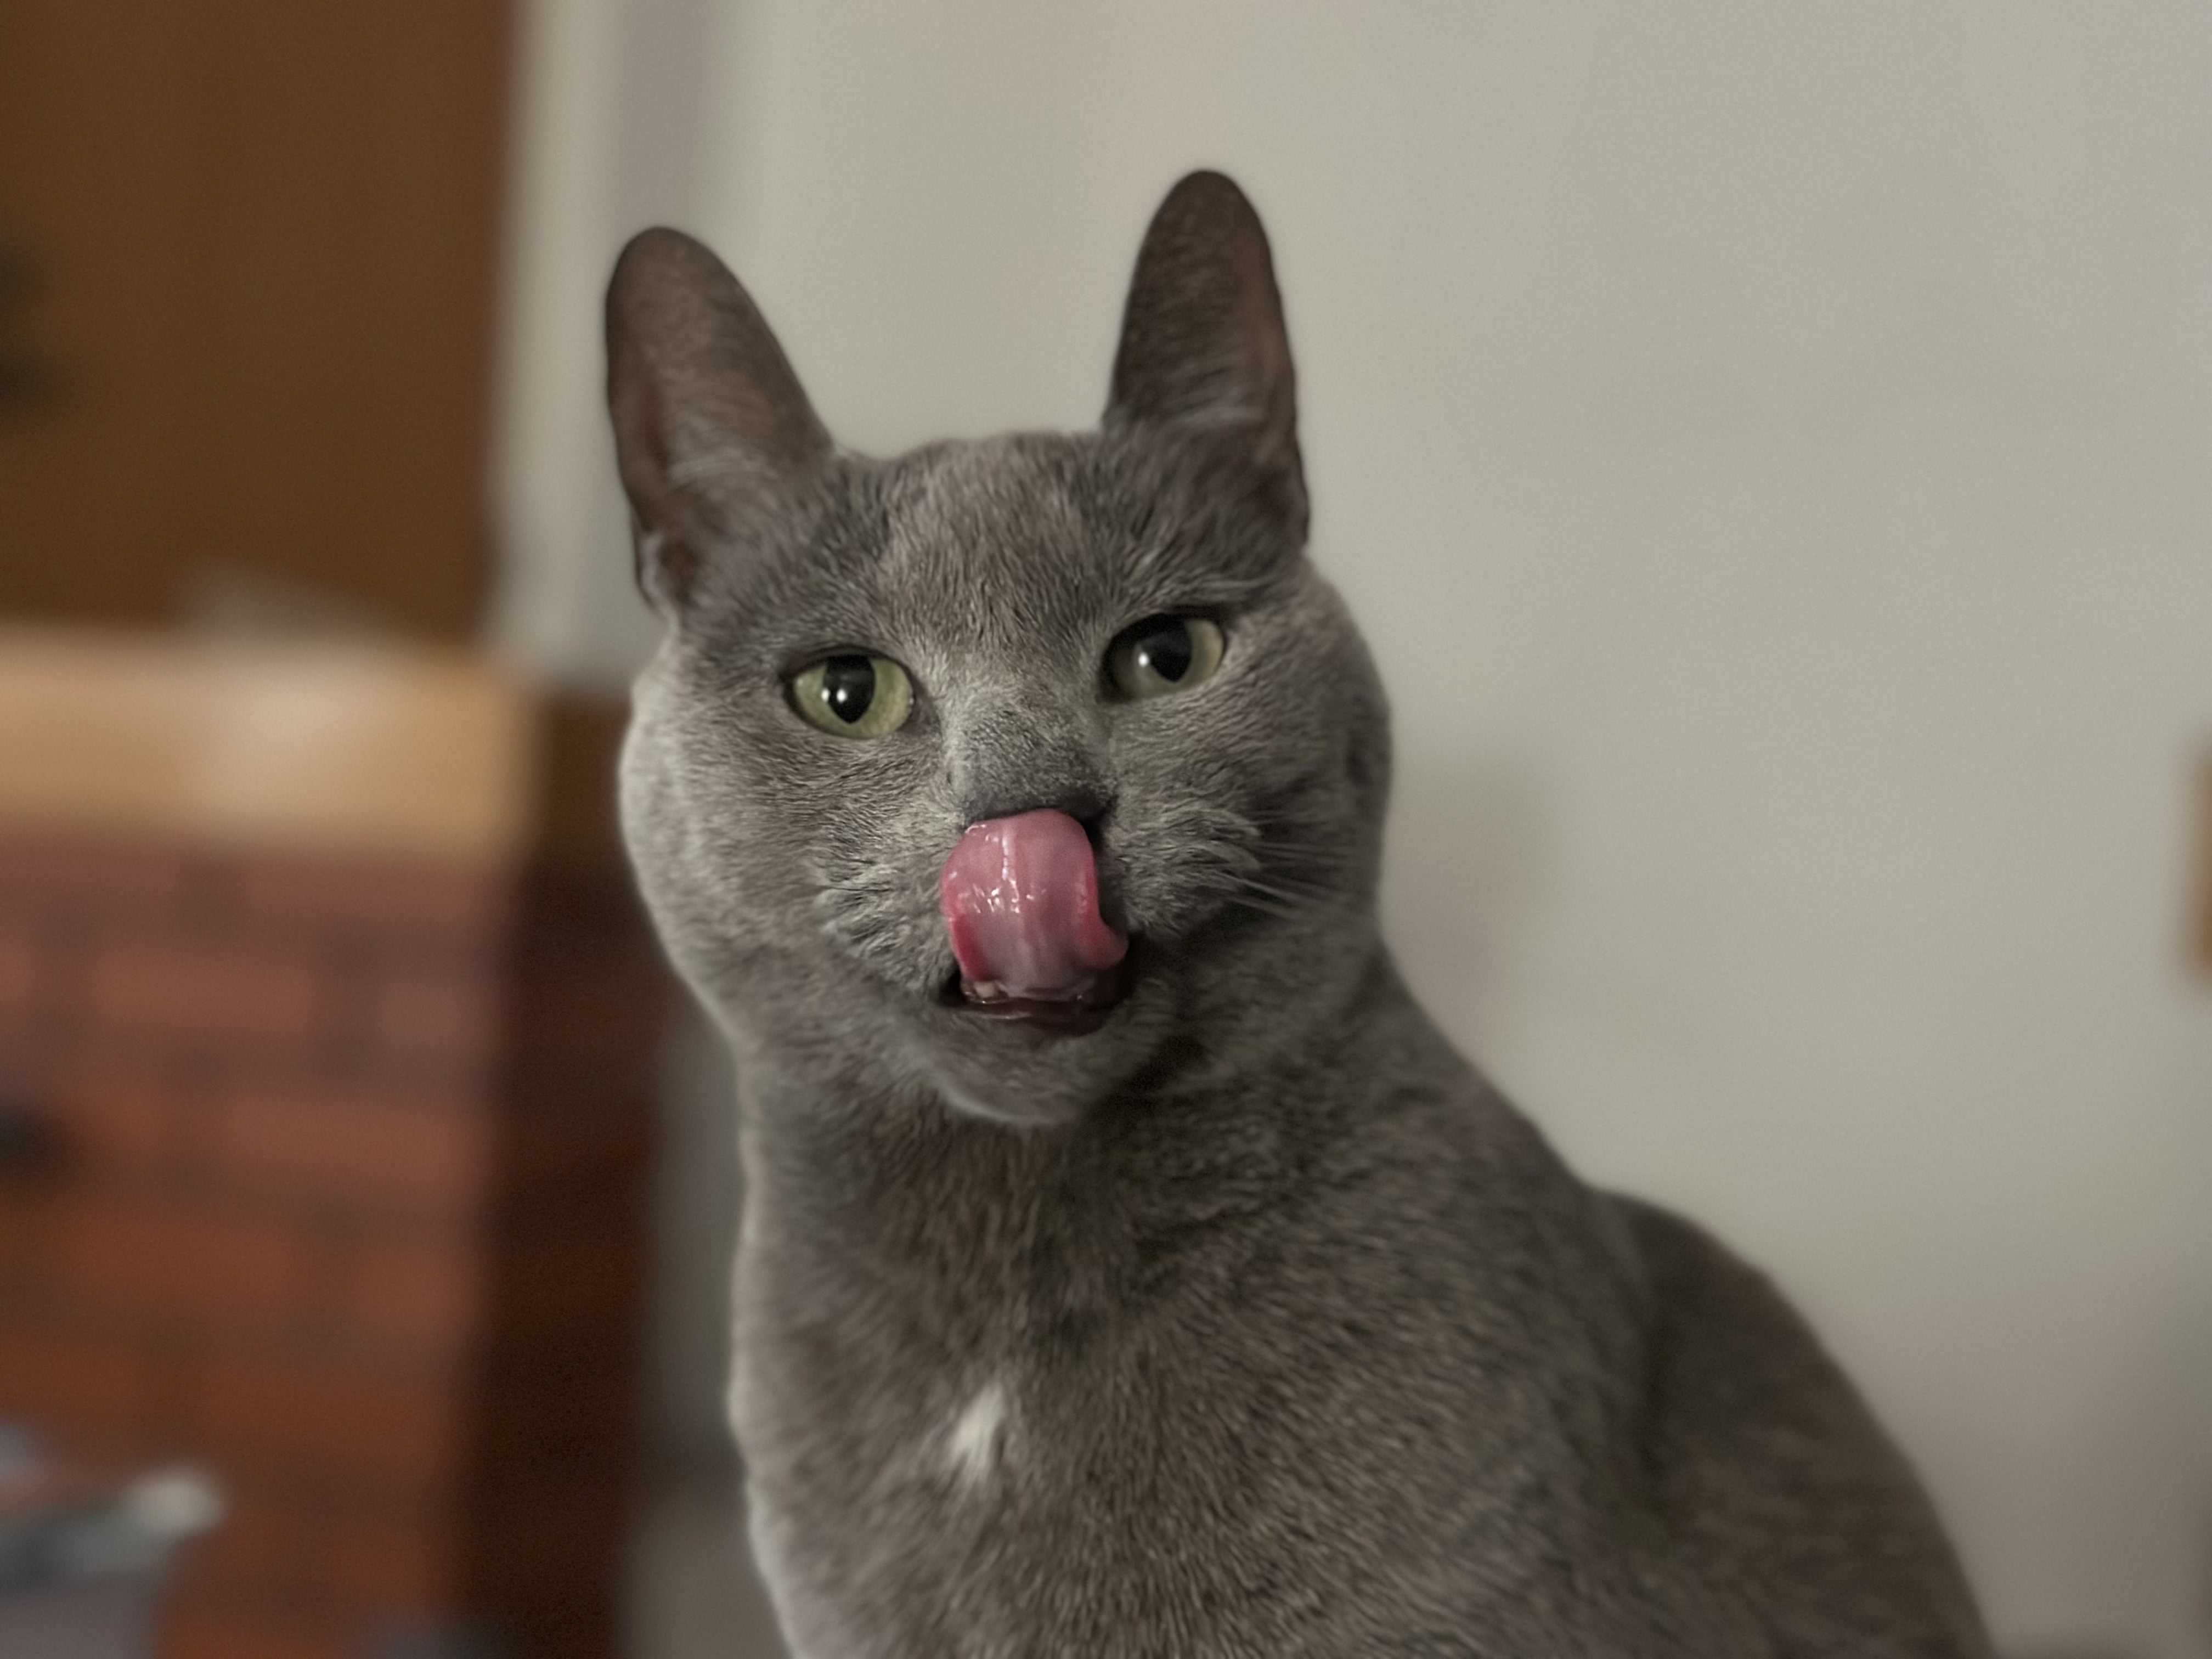 My small grey cat, Arya, with green and yellow eyes licking her lips after having a treat